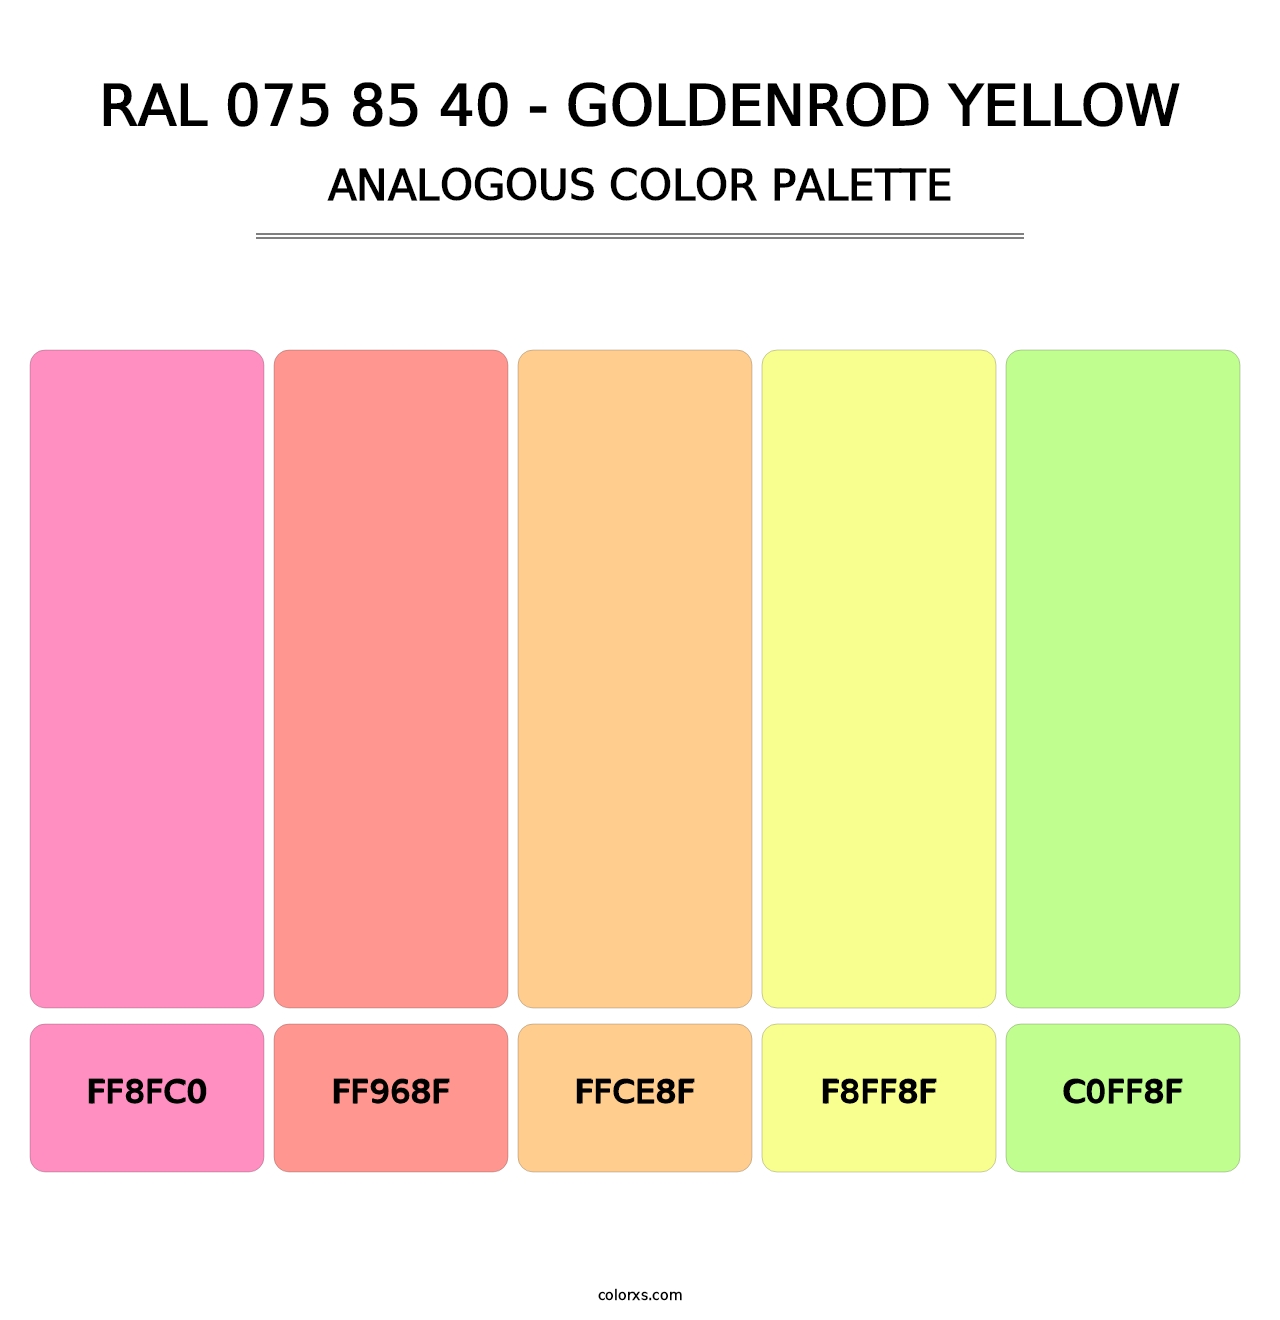 RAL 075 85 40 - Goldenrod Yellow - Analogous Color Palette